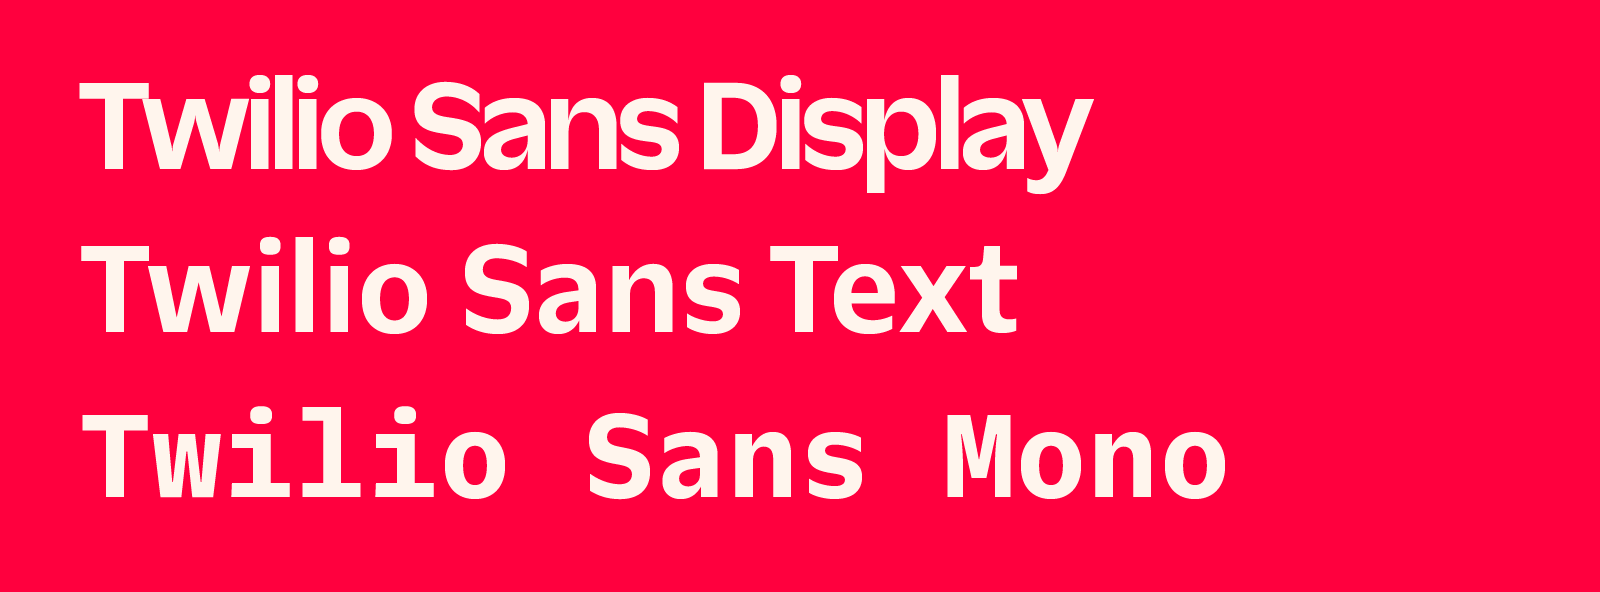 Twilio Sans Typeface selected fonts compared